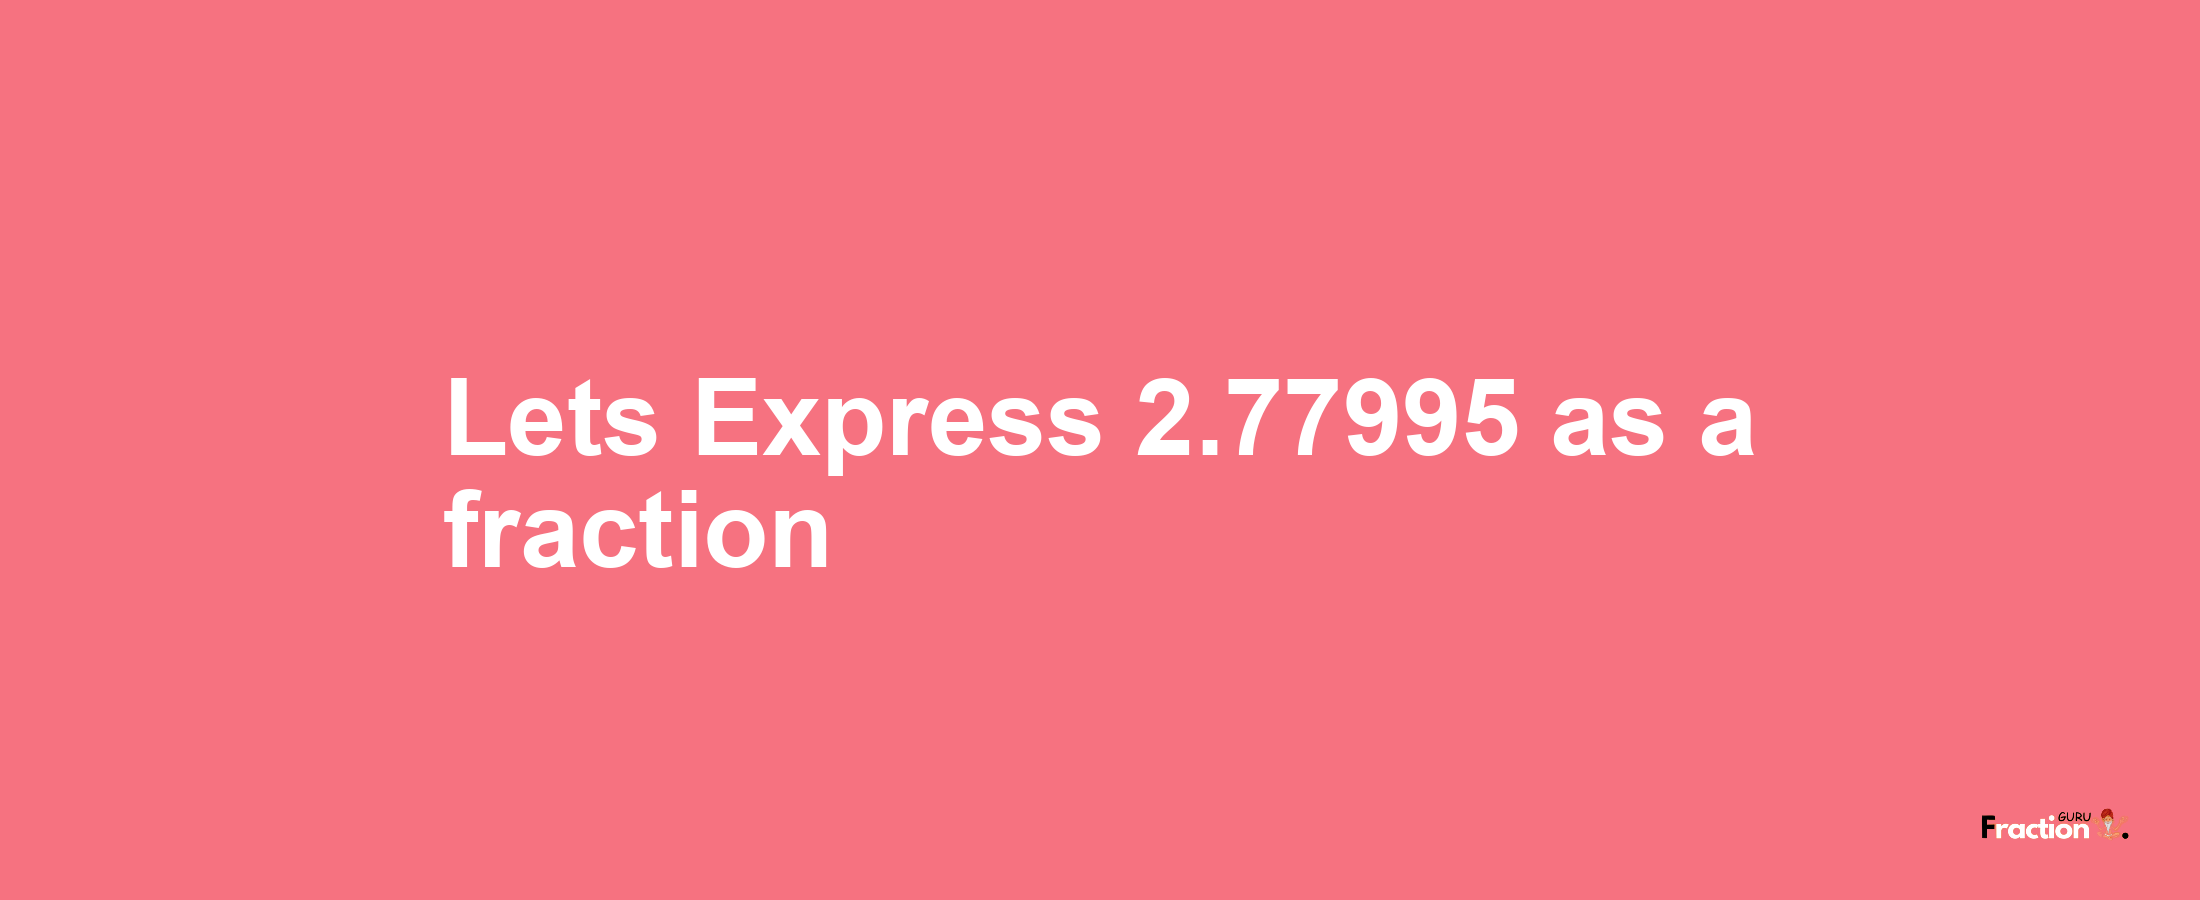 Lets Express 2.77995 as afraction